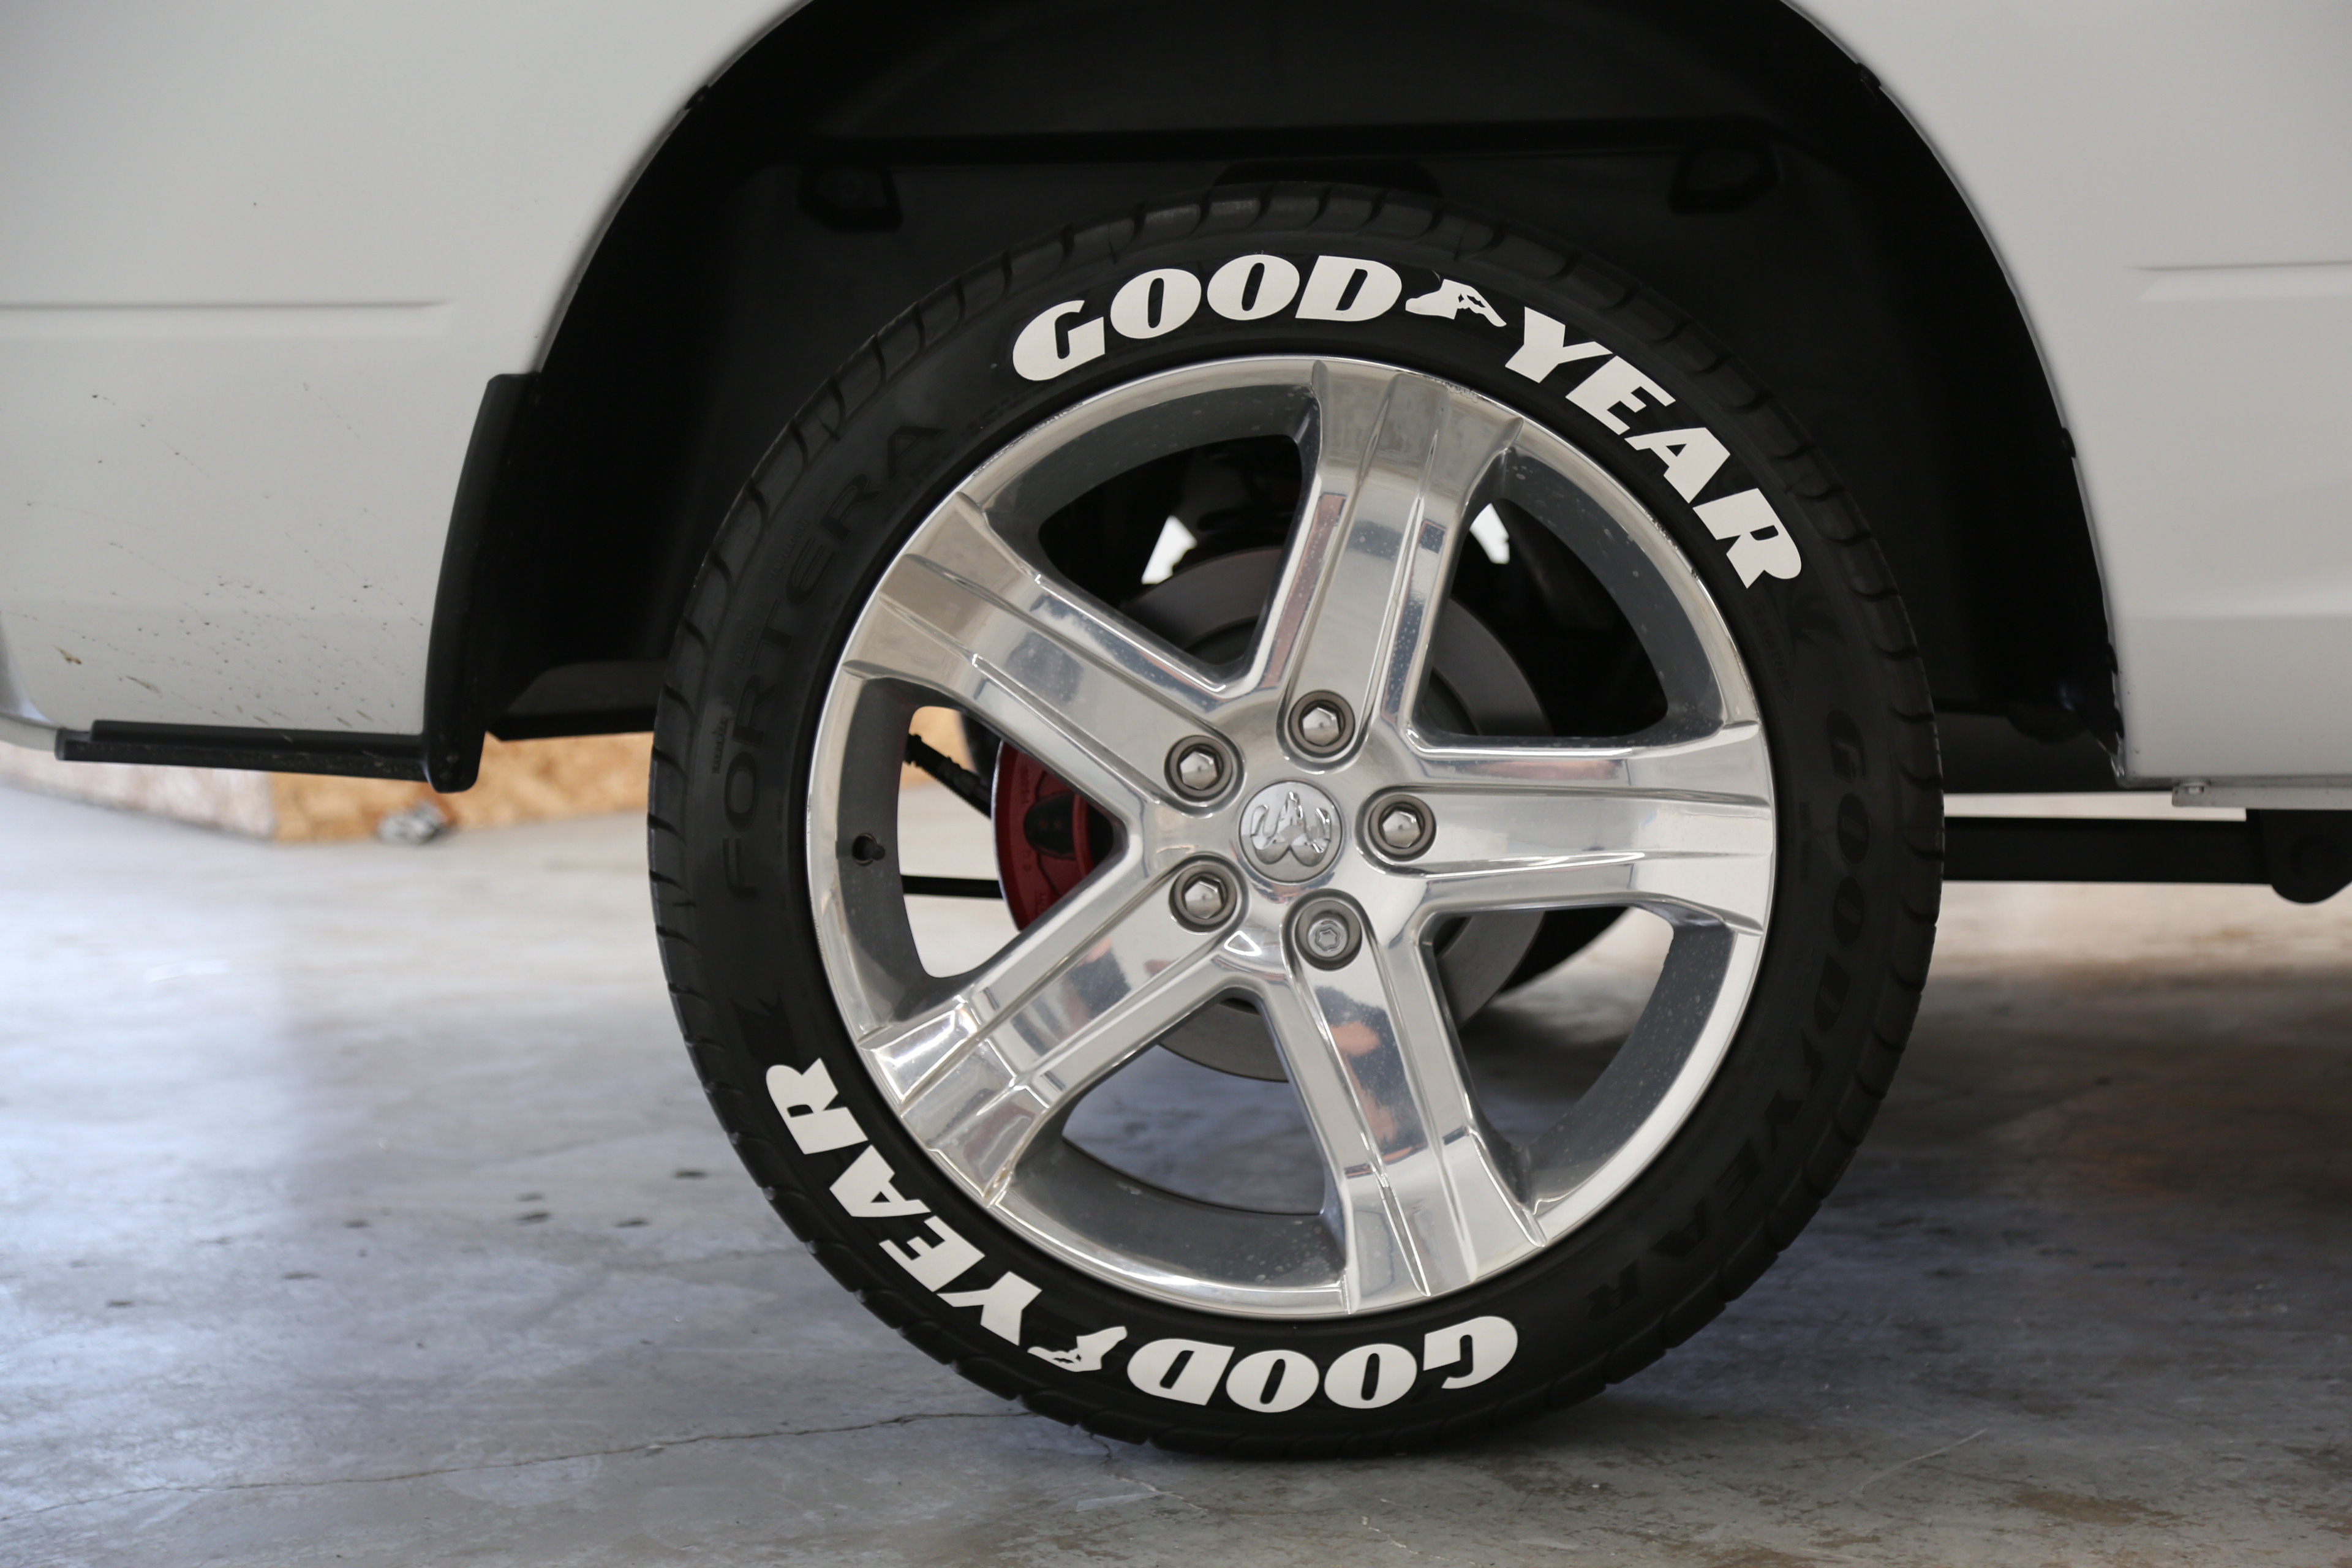 GOODYEAR - White Tire Letters - Tire Lettering Kit